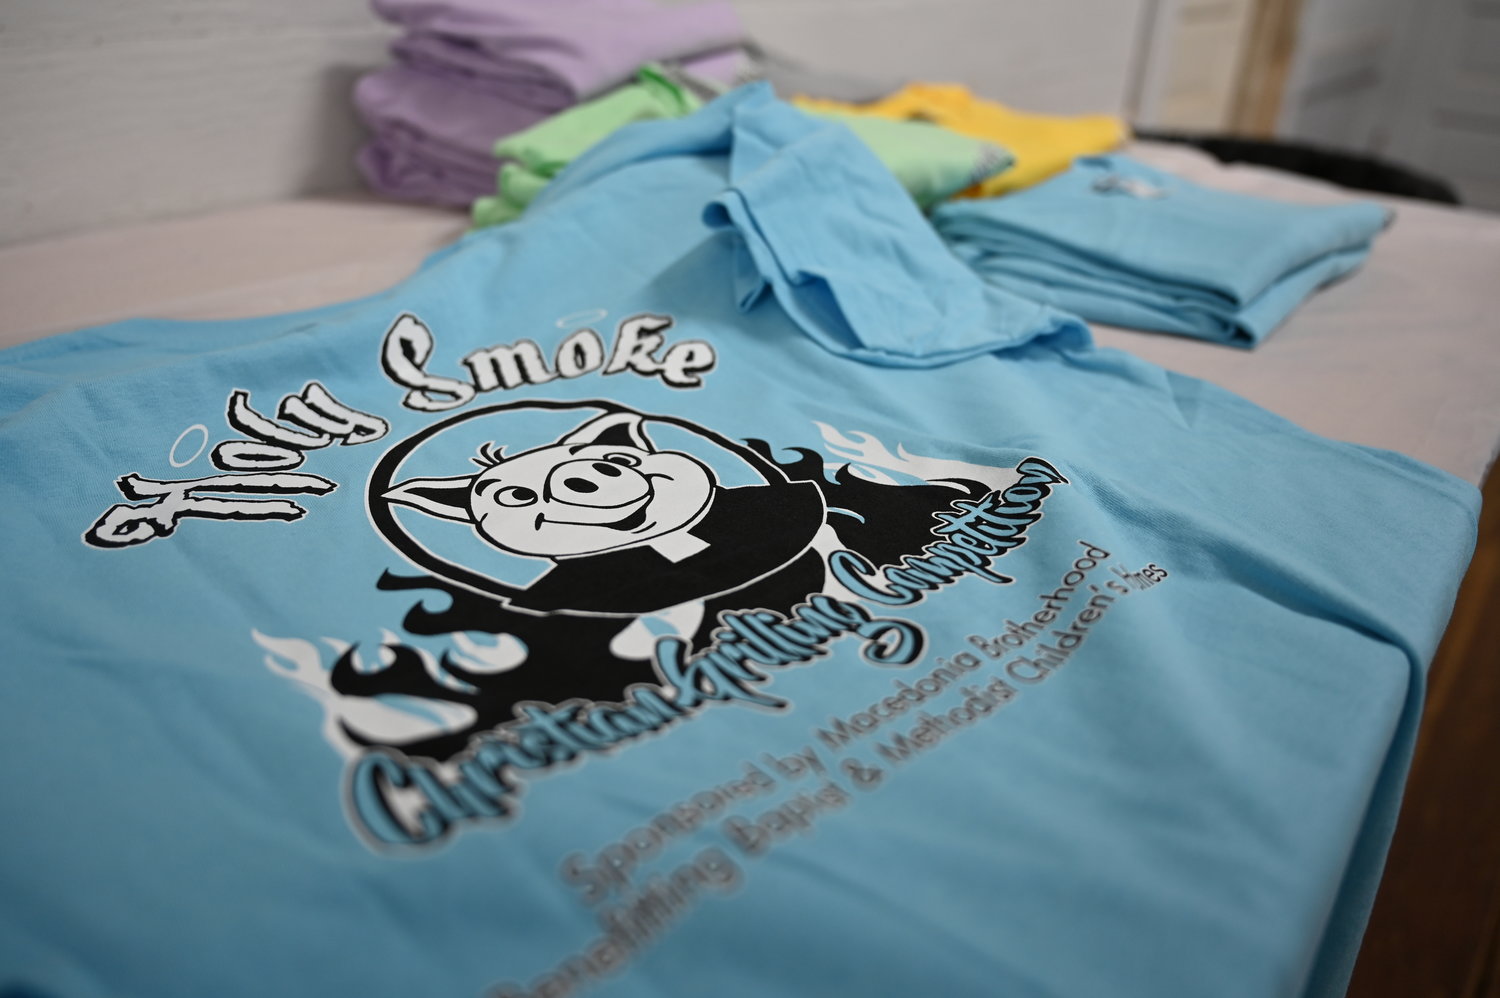 T-shirts promote one of southwest Georgia's favorite event, the Holy Smoke Christian Barbecue Competition. (Index/Roger Alford)